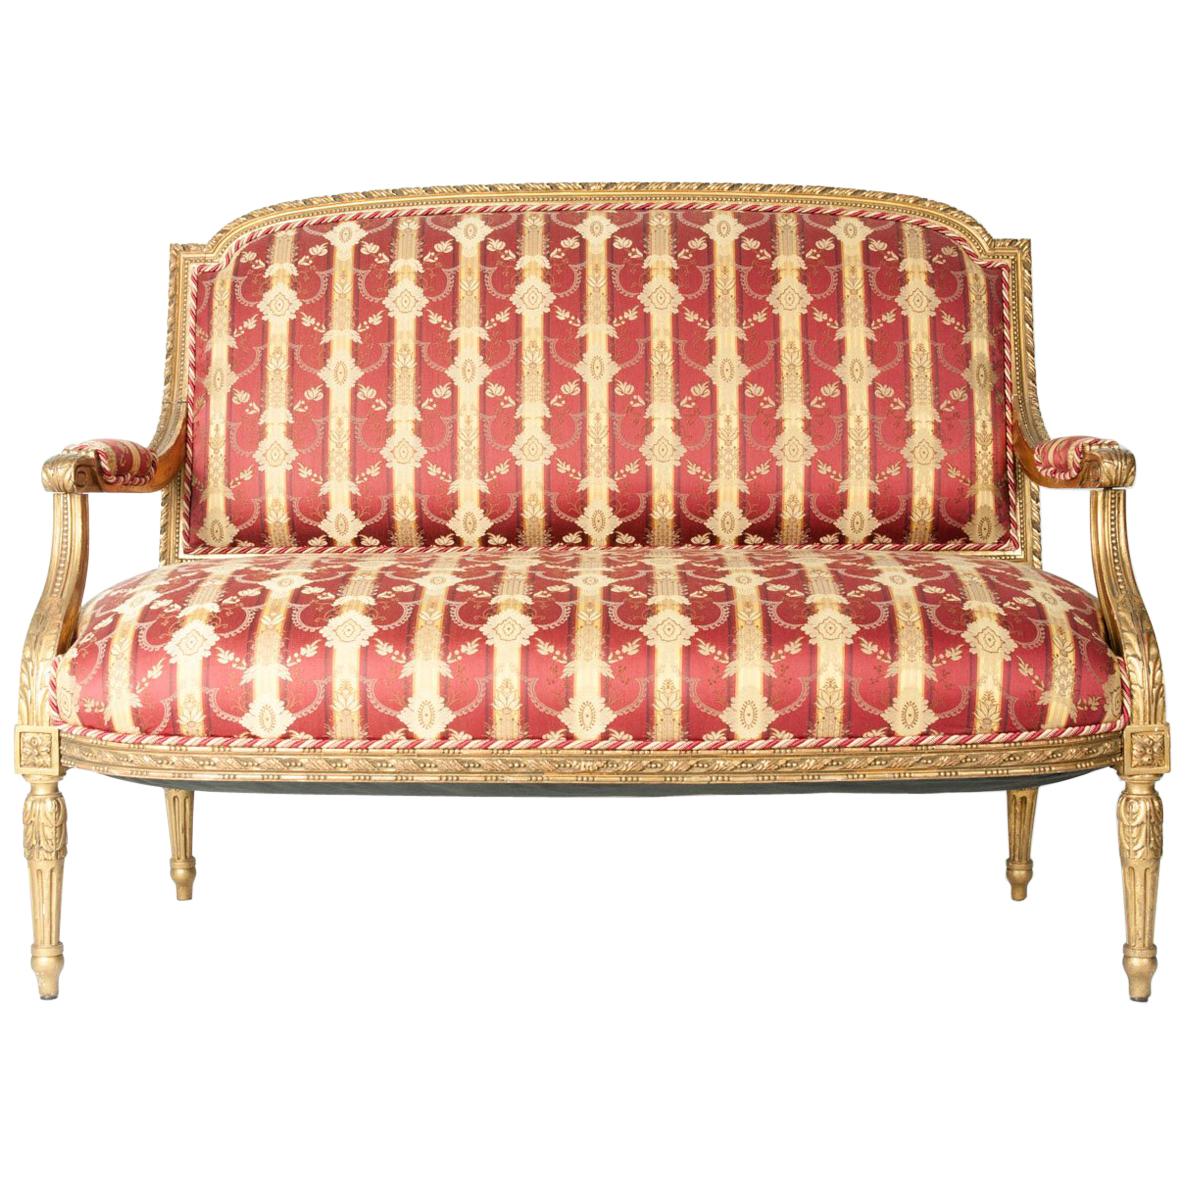 Early 19th Century Louis XVI Style Giltwood Settee